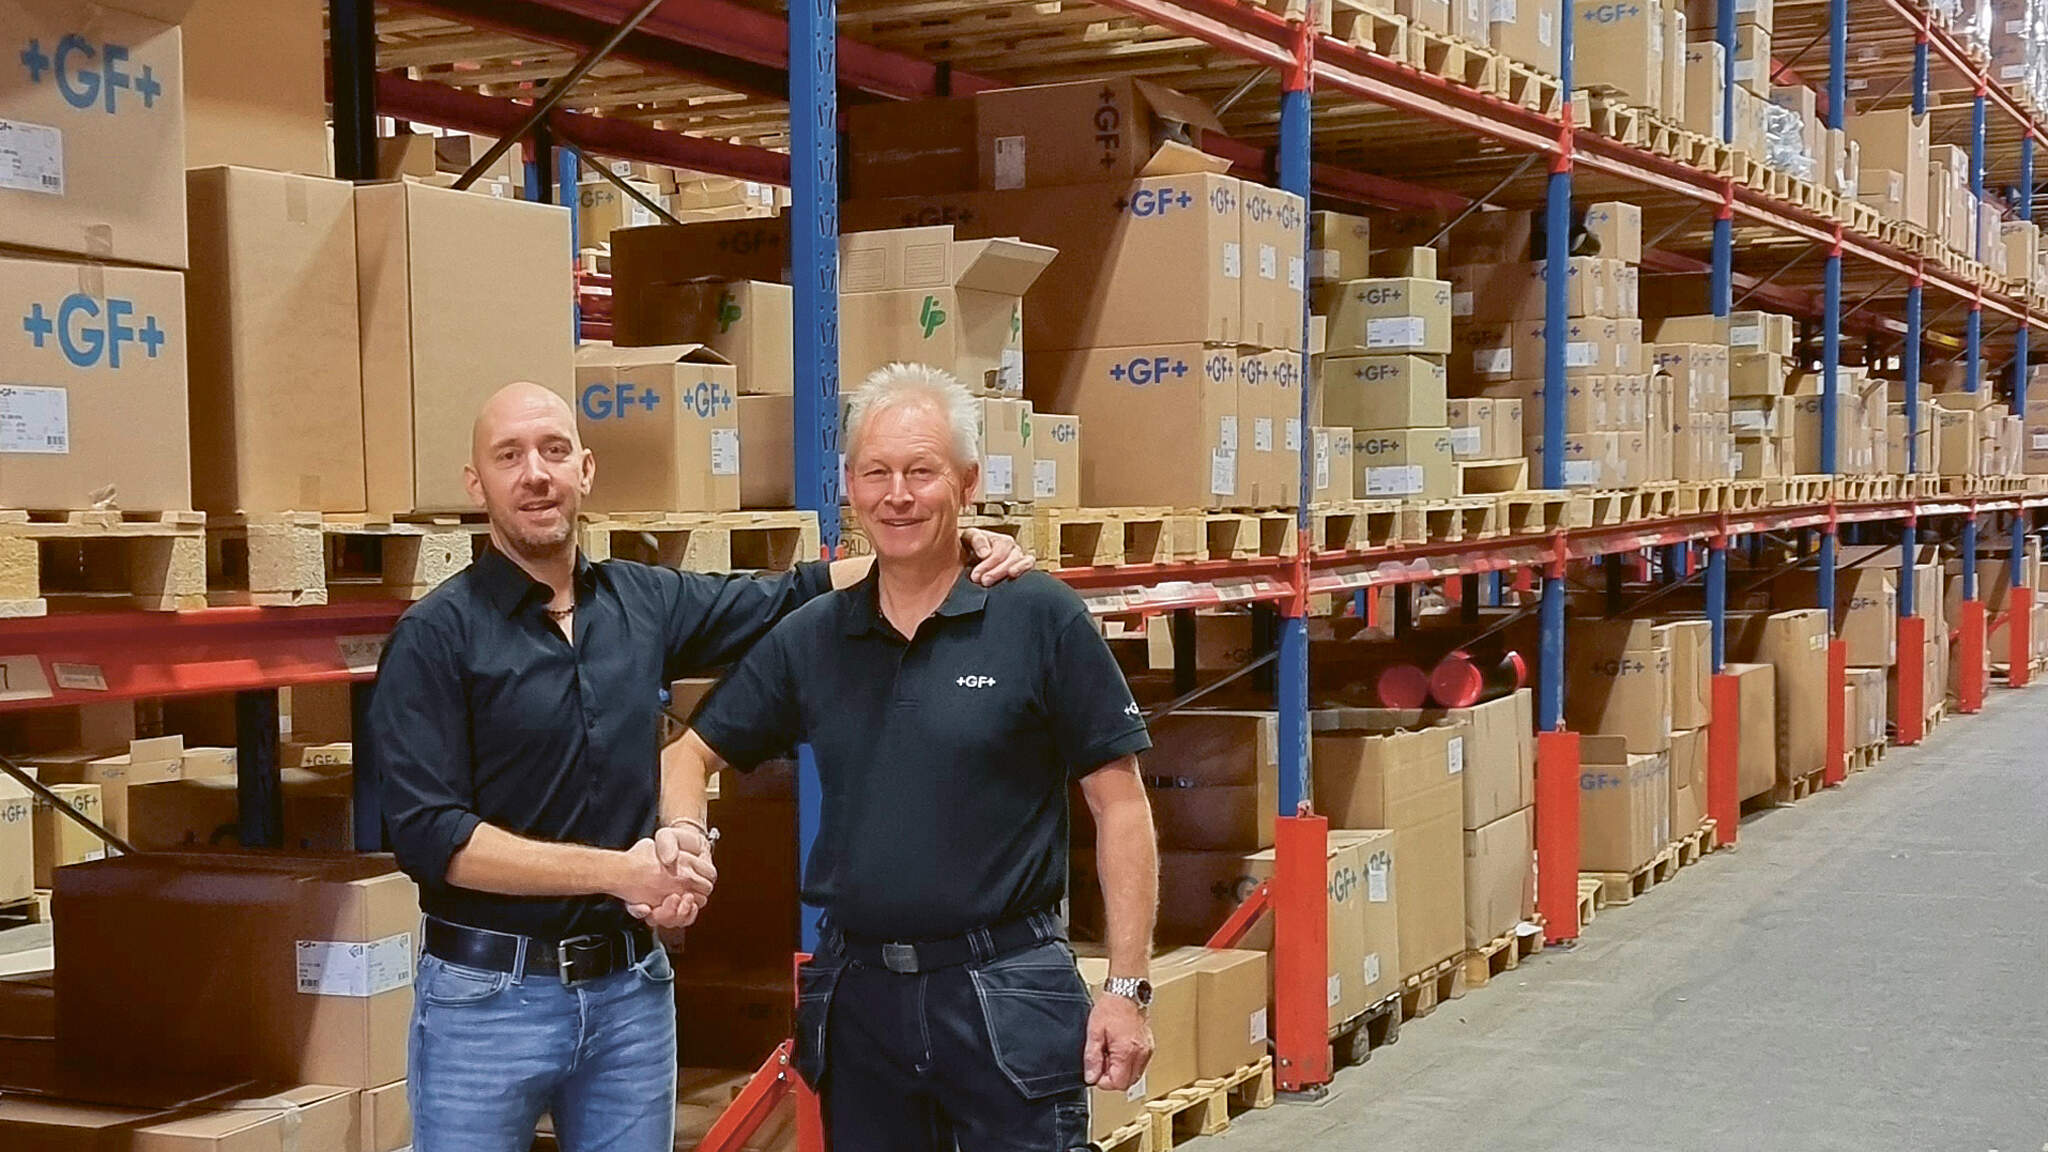 Team players: Fredrik Rånge, Warehouse Manager at Dachser in Jönköping (left) and Thomas Hammarback, DC Manager at GF Piping Systems.